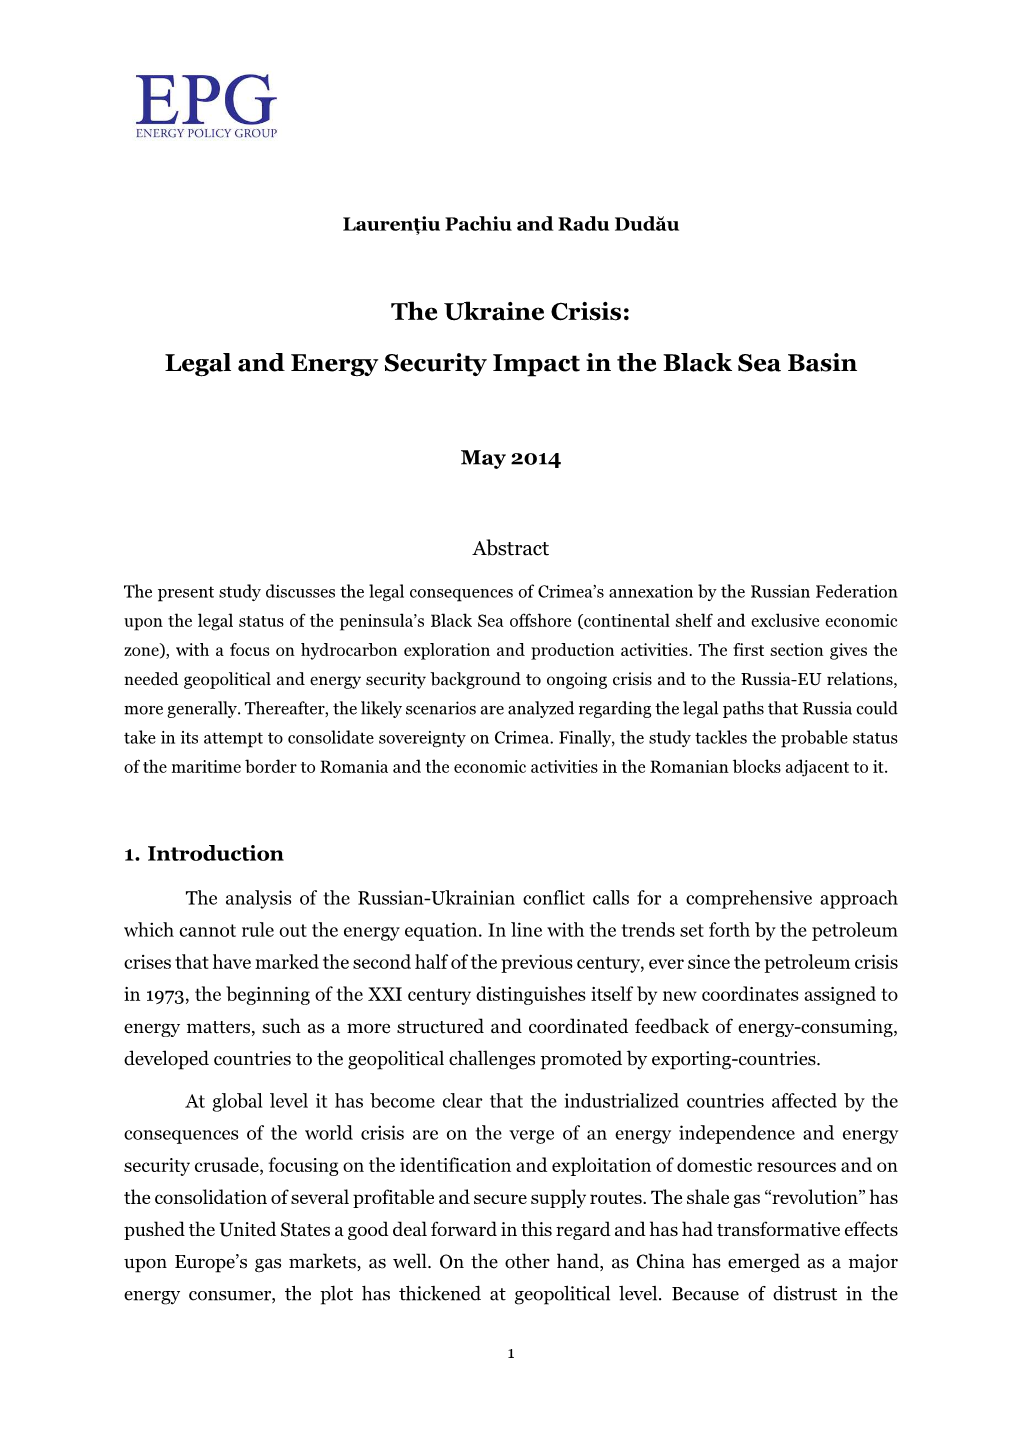 The Ukraine Crisis: Legal and Energy Security Impact in the Black Sea Basin